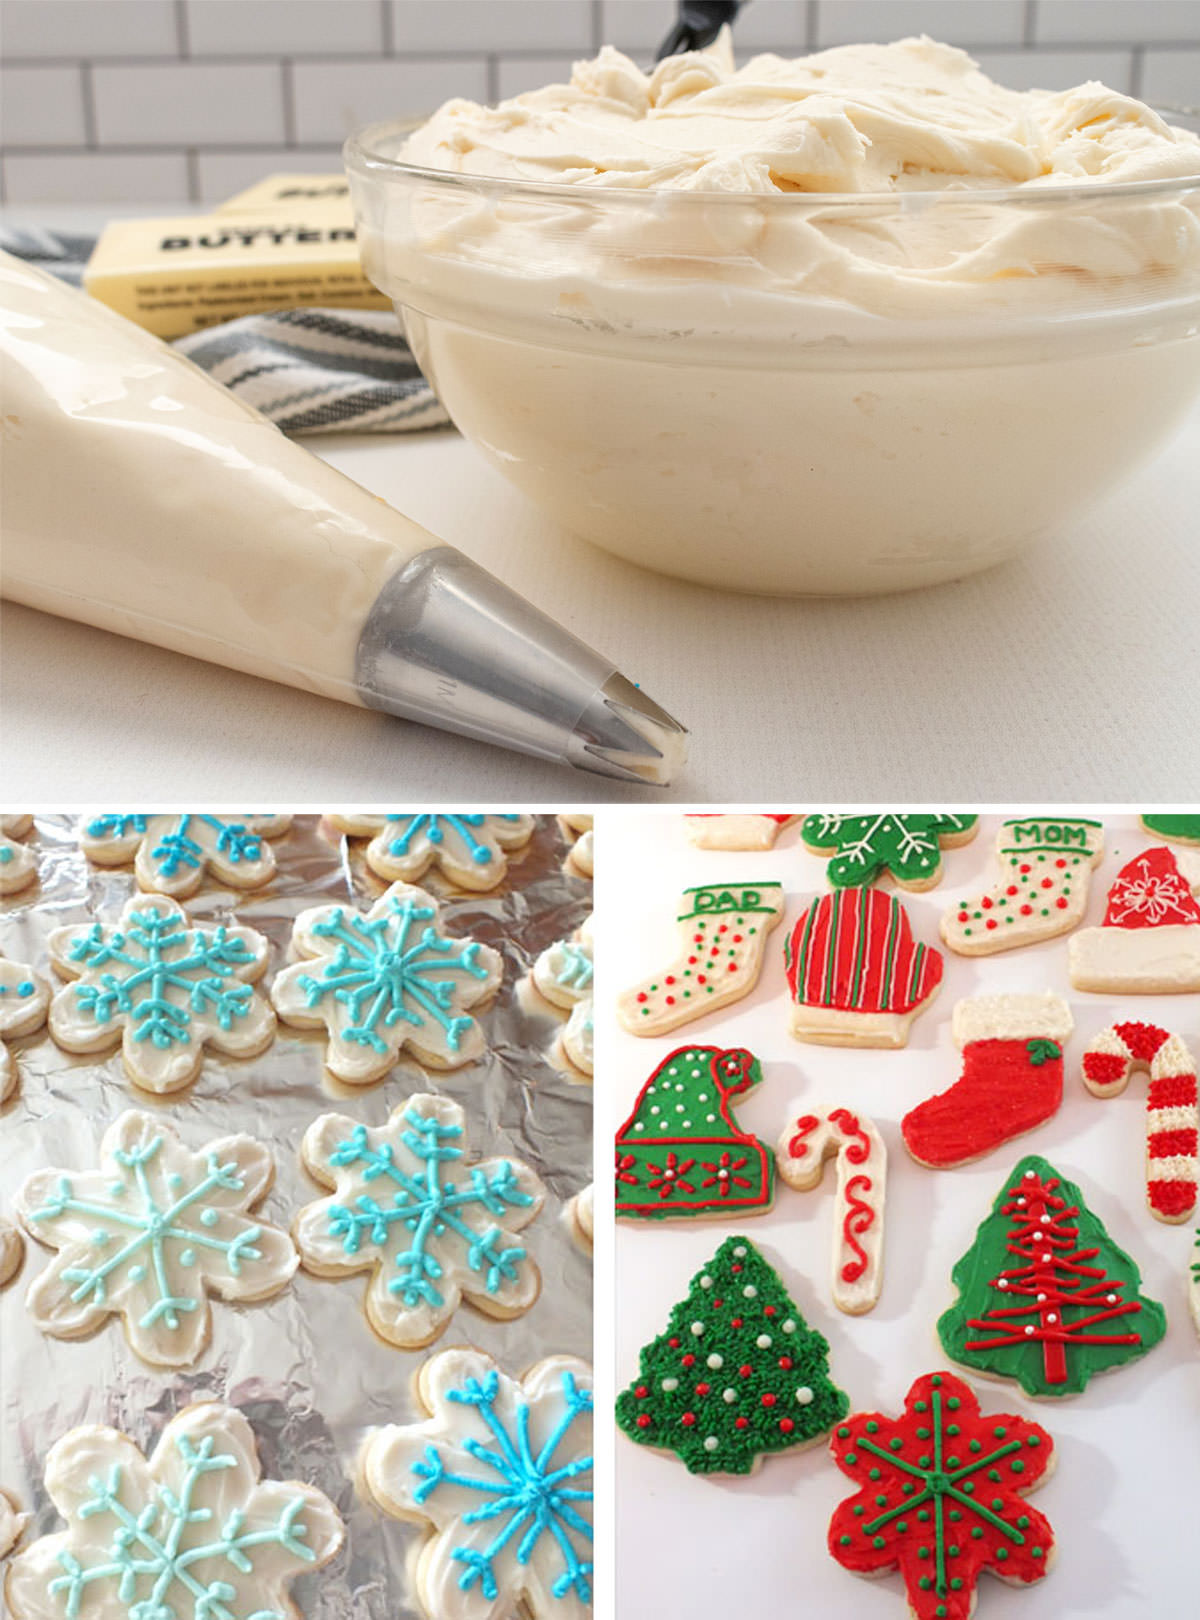 Collage image showing a bowl of Buttercream Frosting and sugar cookies decorated with buttercream frosting for Christmas.